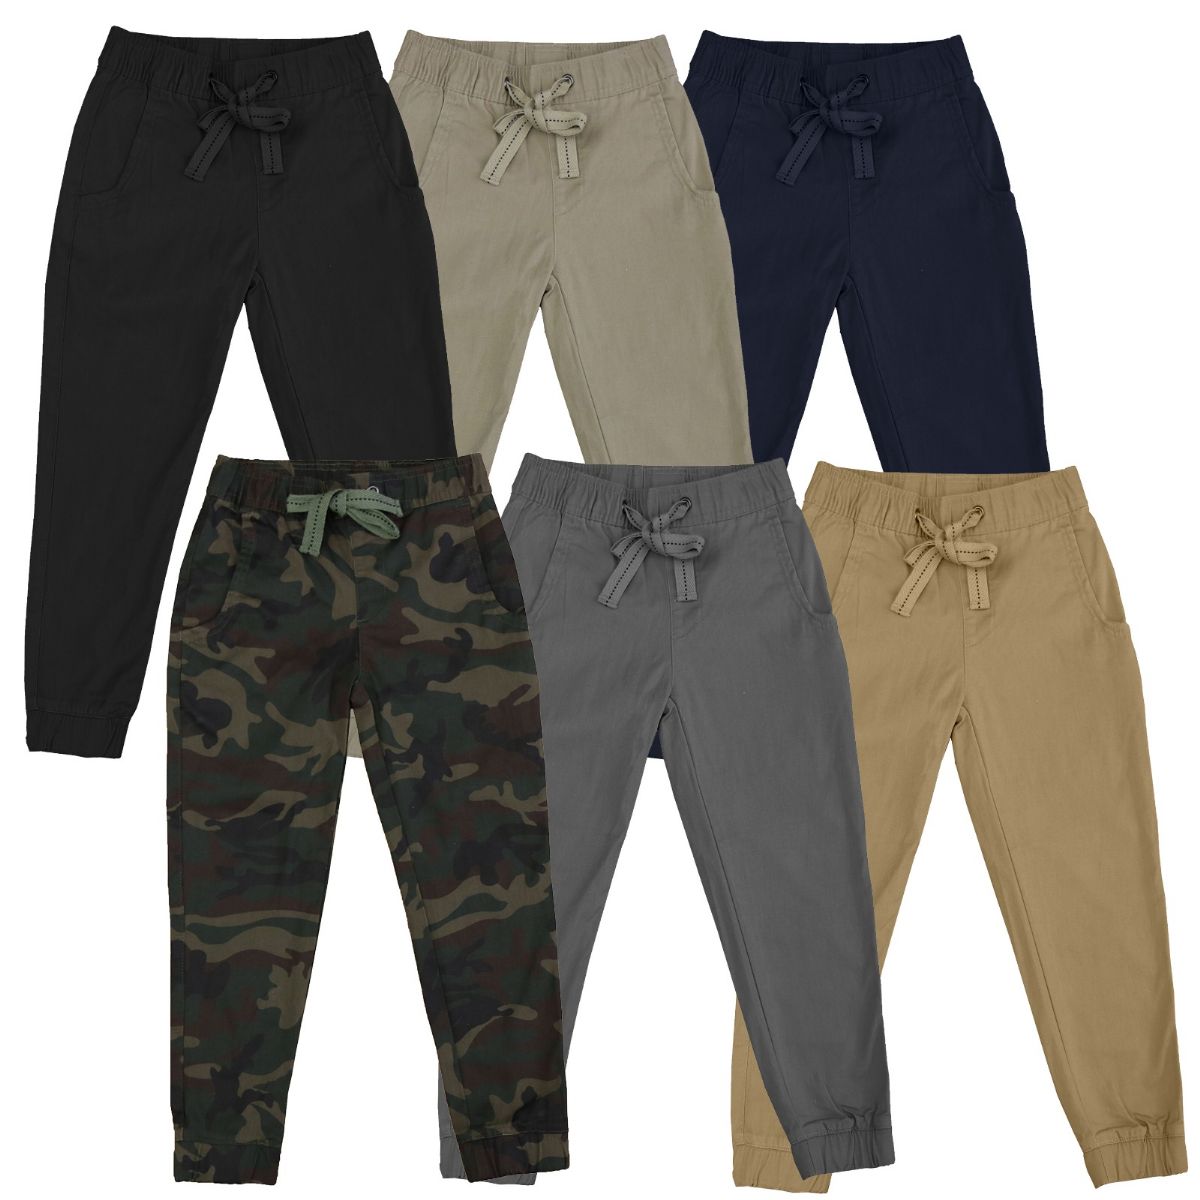 24 Pieces of Youth Boy Twill Jogger Pants In Assorted Colors Size xl